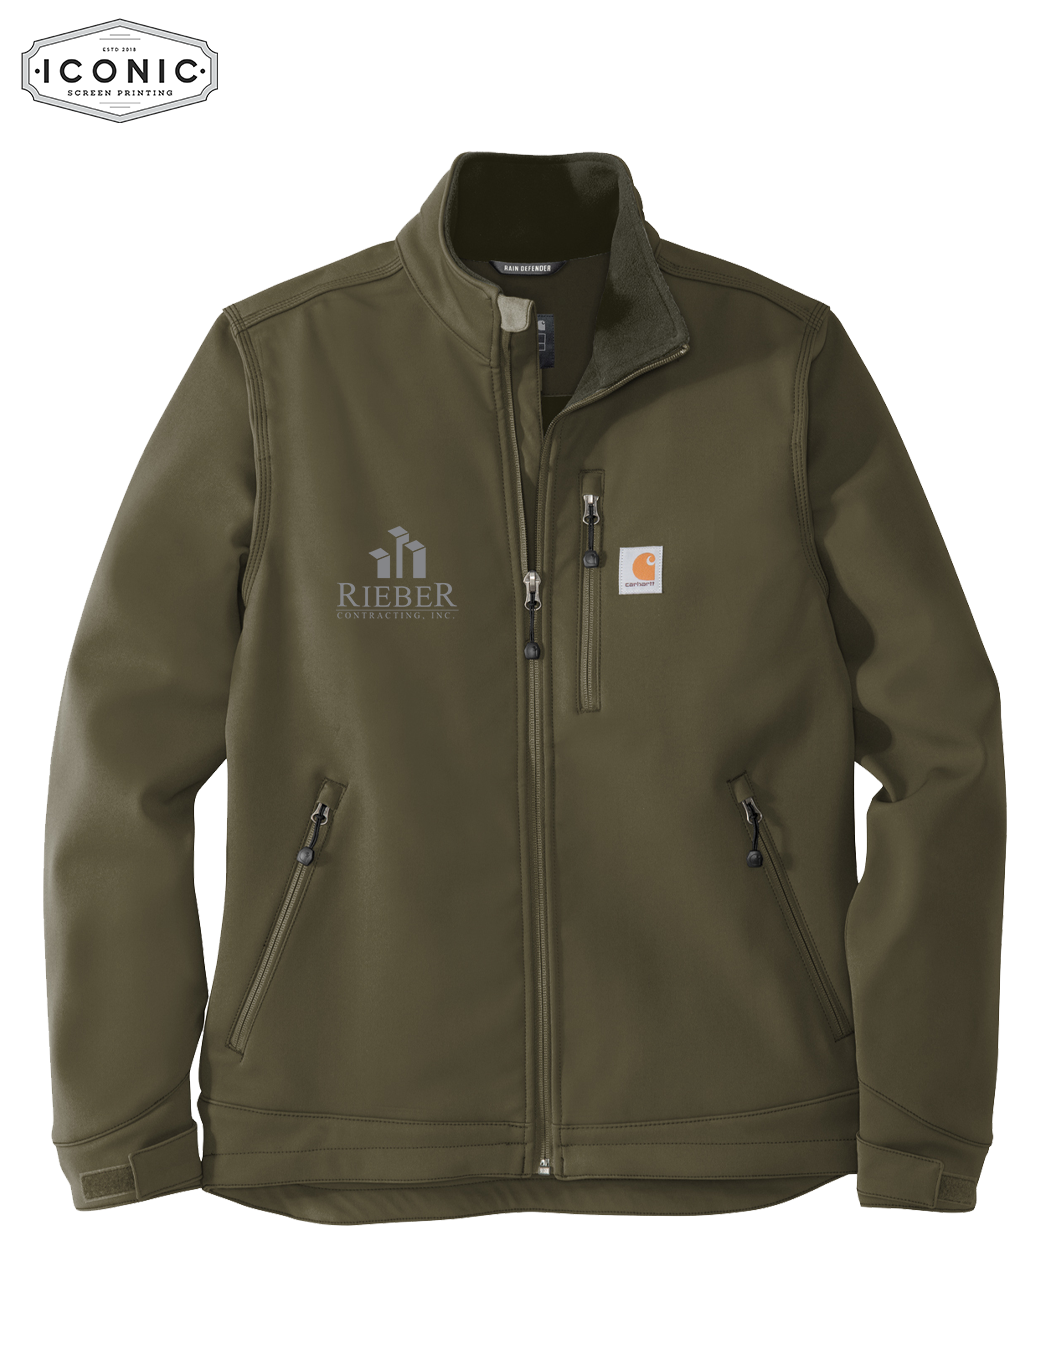 Rieber Contracting- Carhartt Crowley Soft Shell Jacket - Embroidery